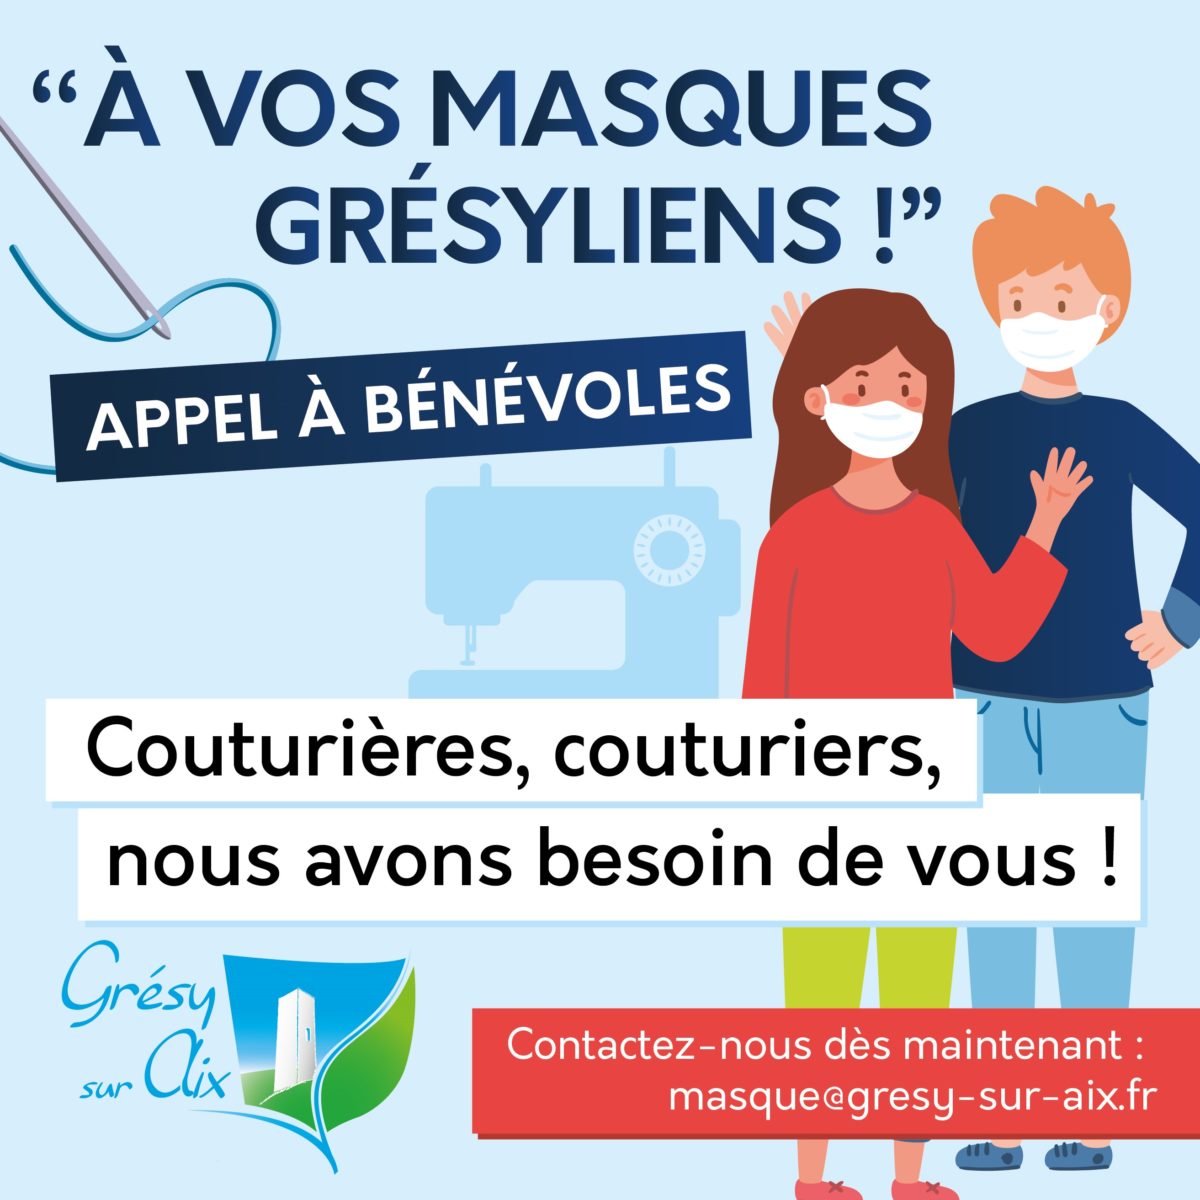 OPERATION « A VOS MASQUES GRESYLIENS ! »